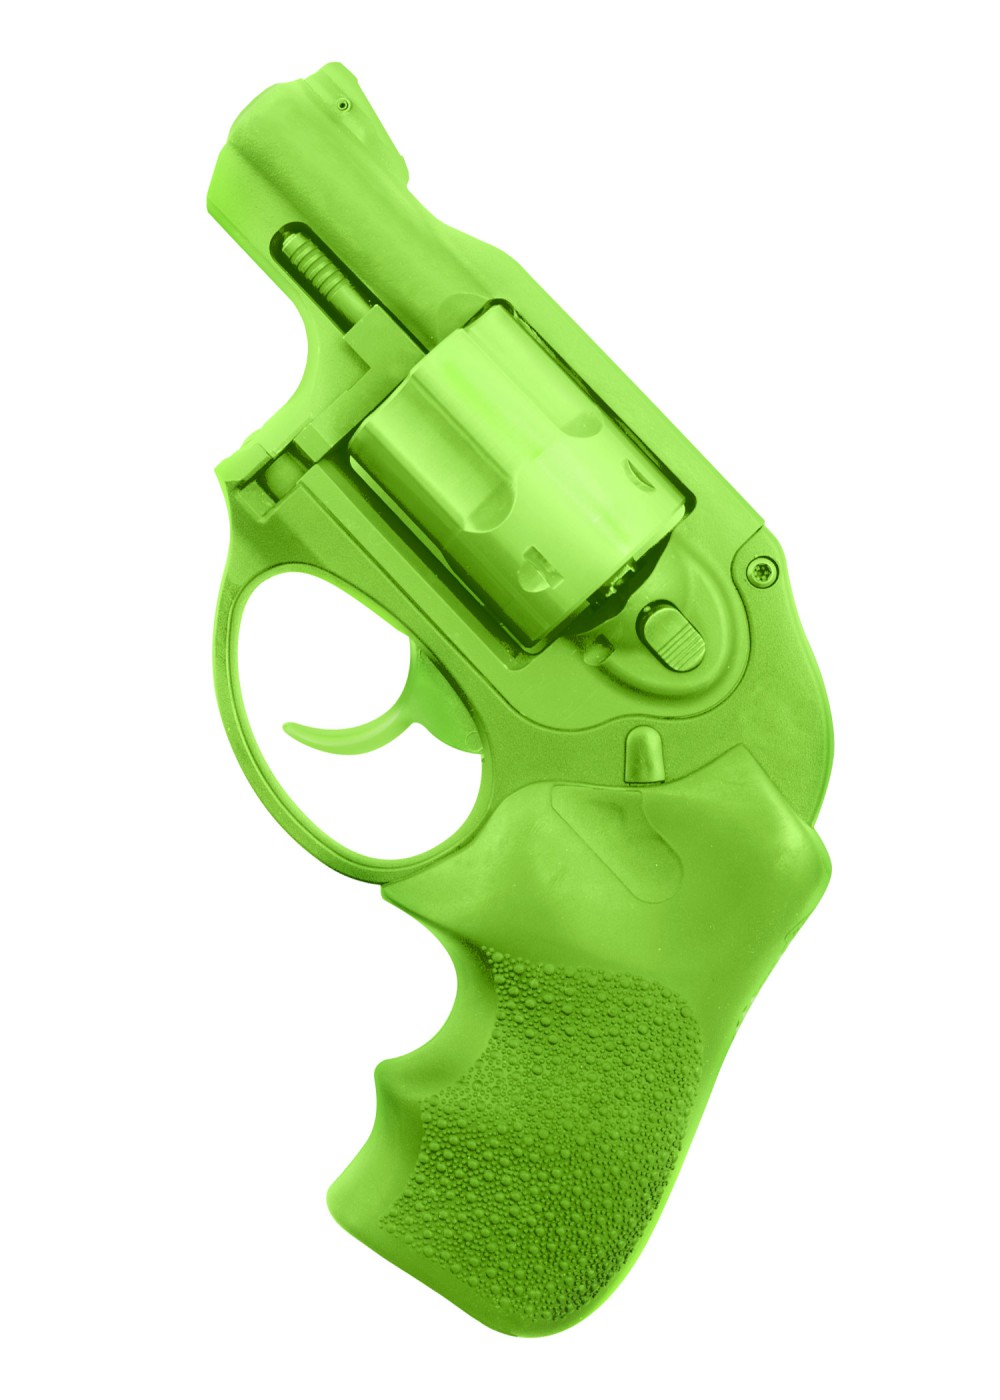 Ruger LCR Rubber Training Revolver